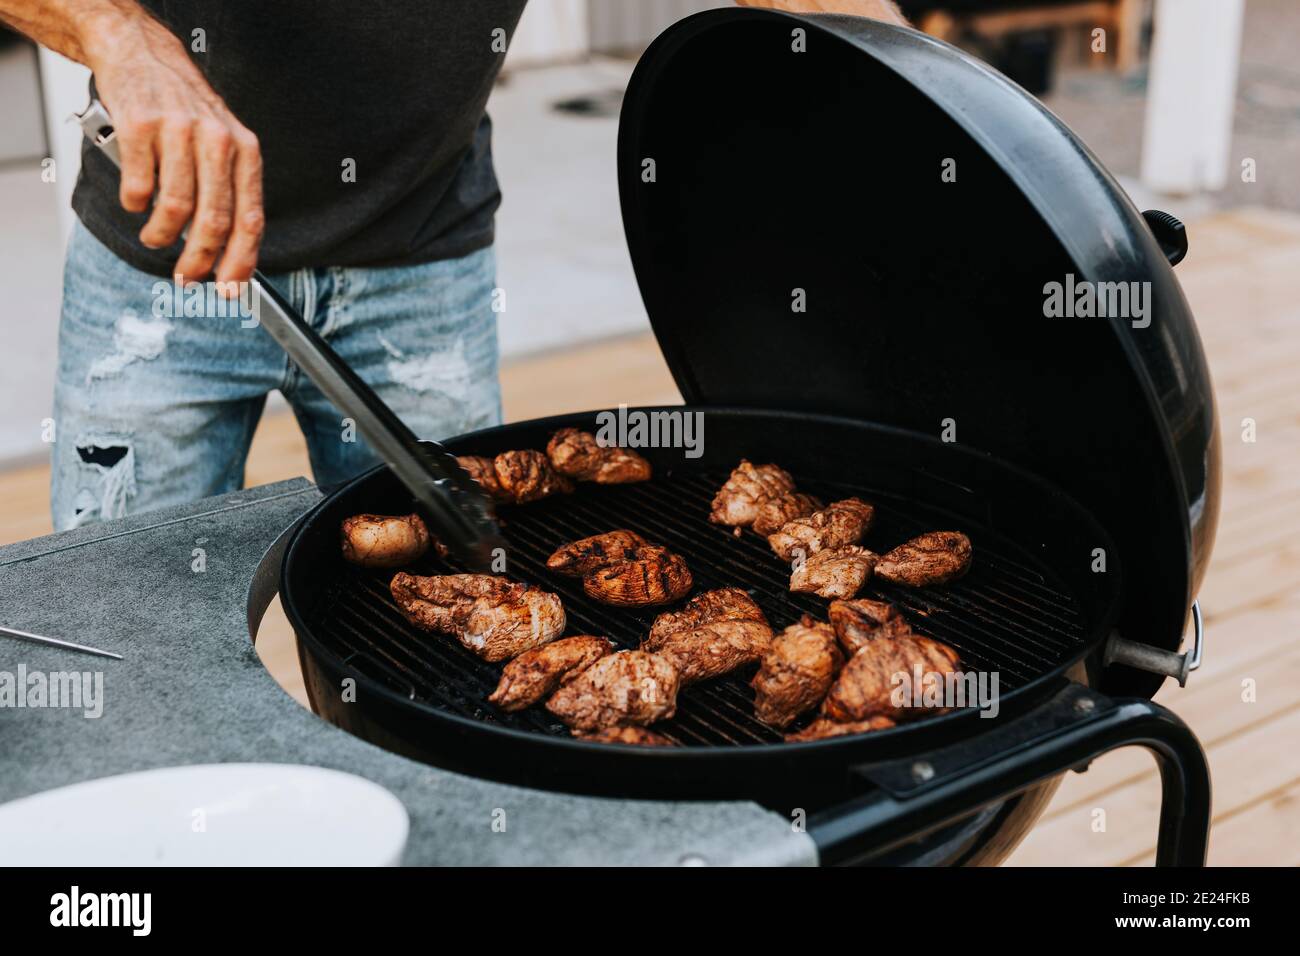 Man preparing meat on barbecue Stock Photo